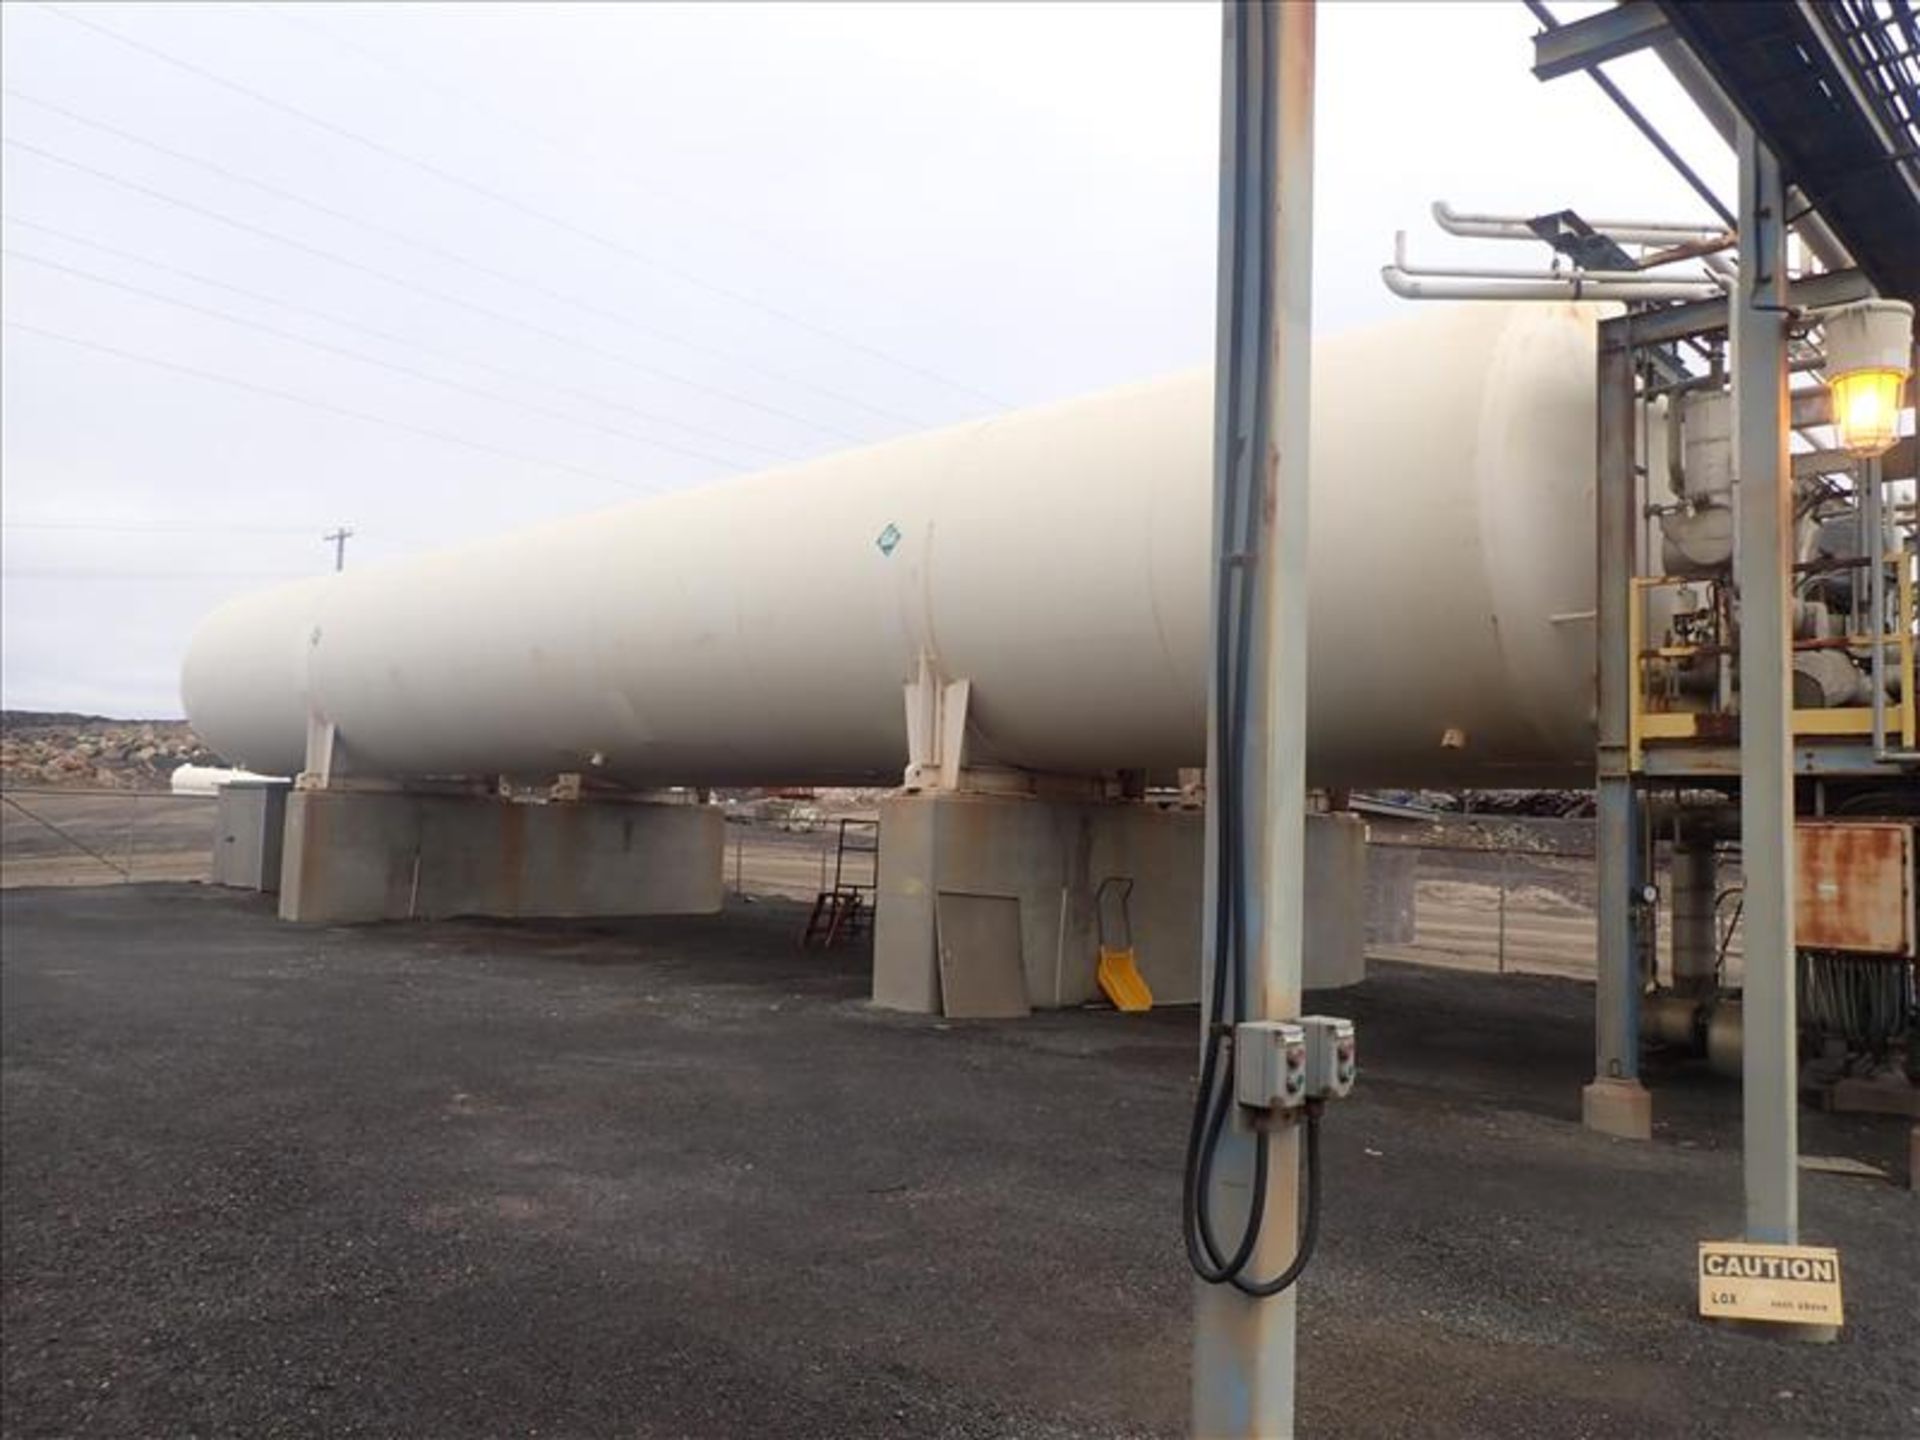 liquid oxygen storage tank, s/s, 270-ton, 11 ft dia. x 90 ft, 65 psi, vacuum jacketed (Tag 7012 - Image 2 of 4